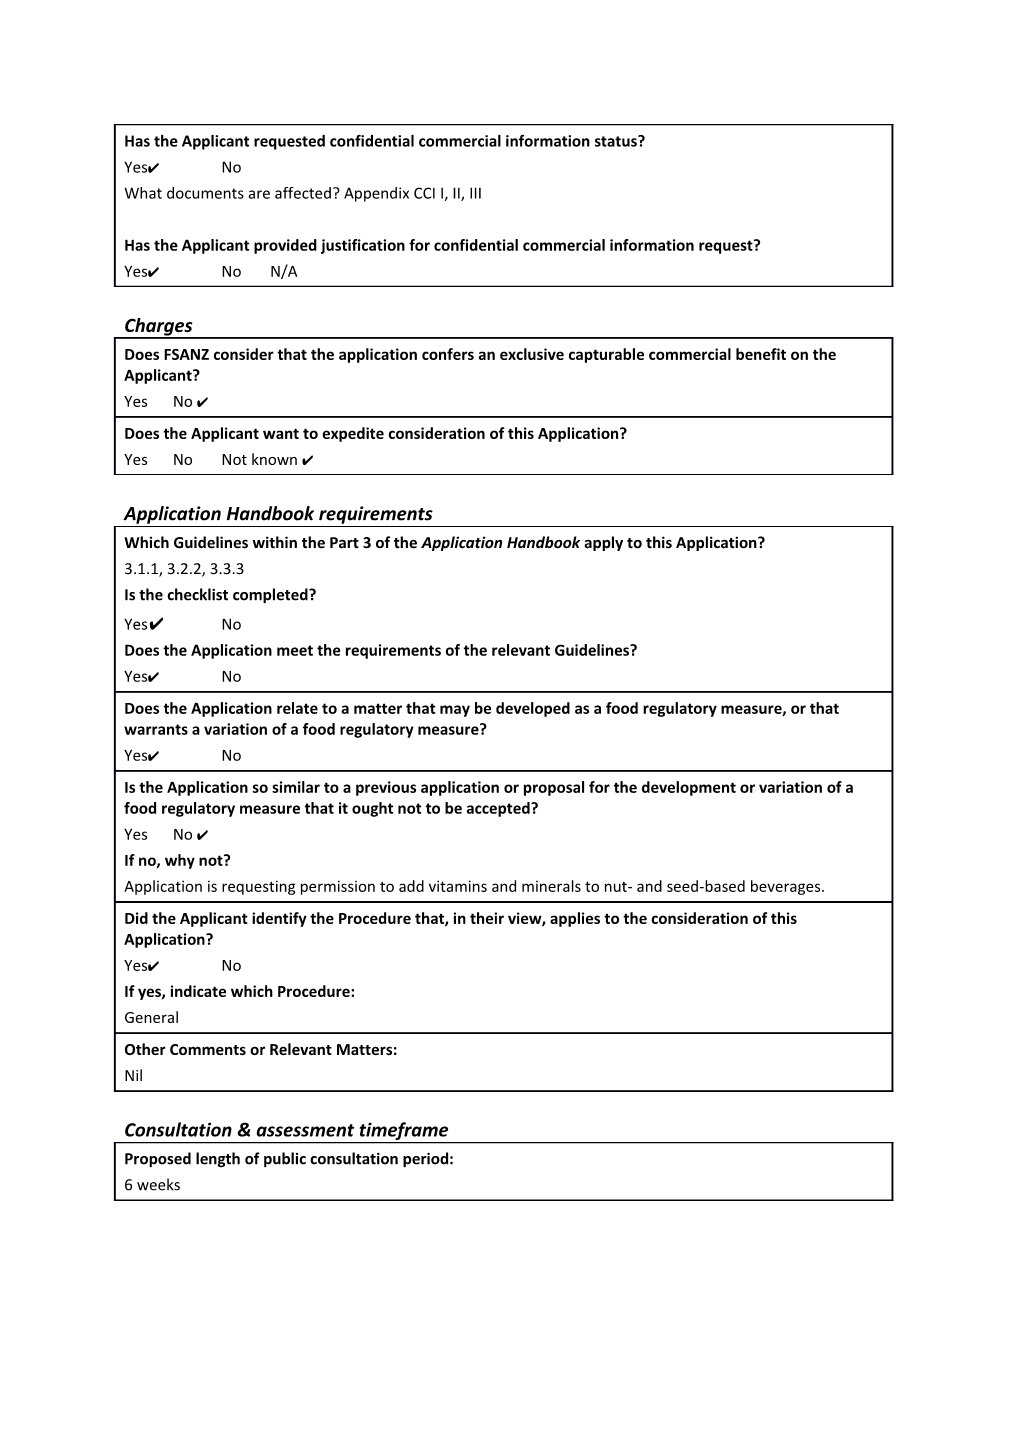 Administrative Assessment Report Application A1104